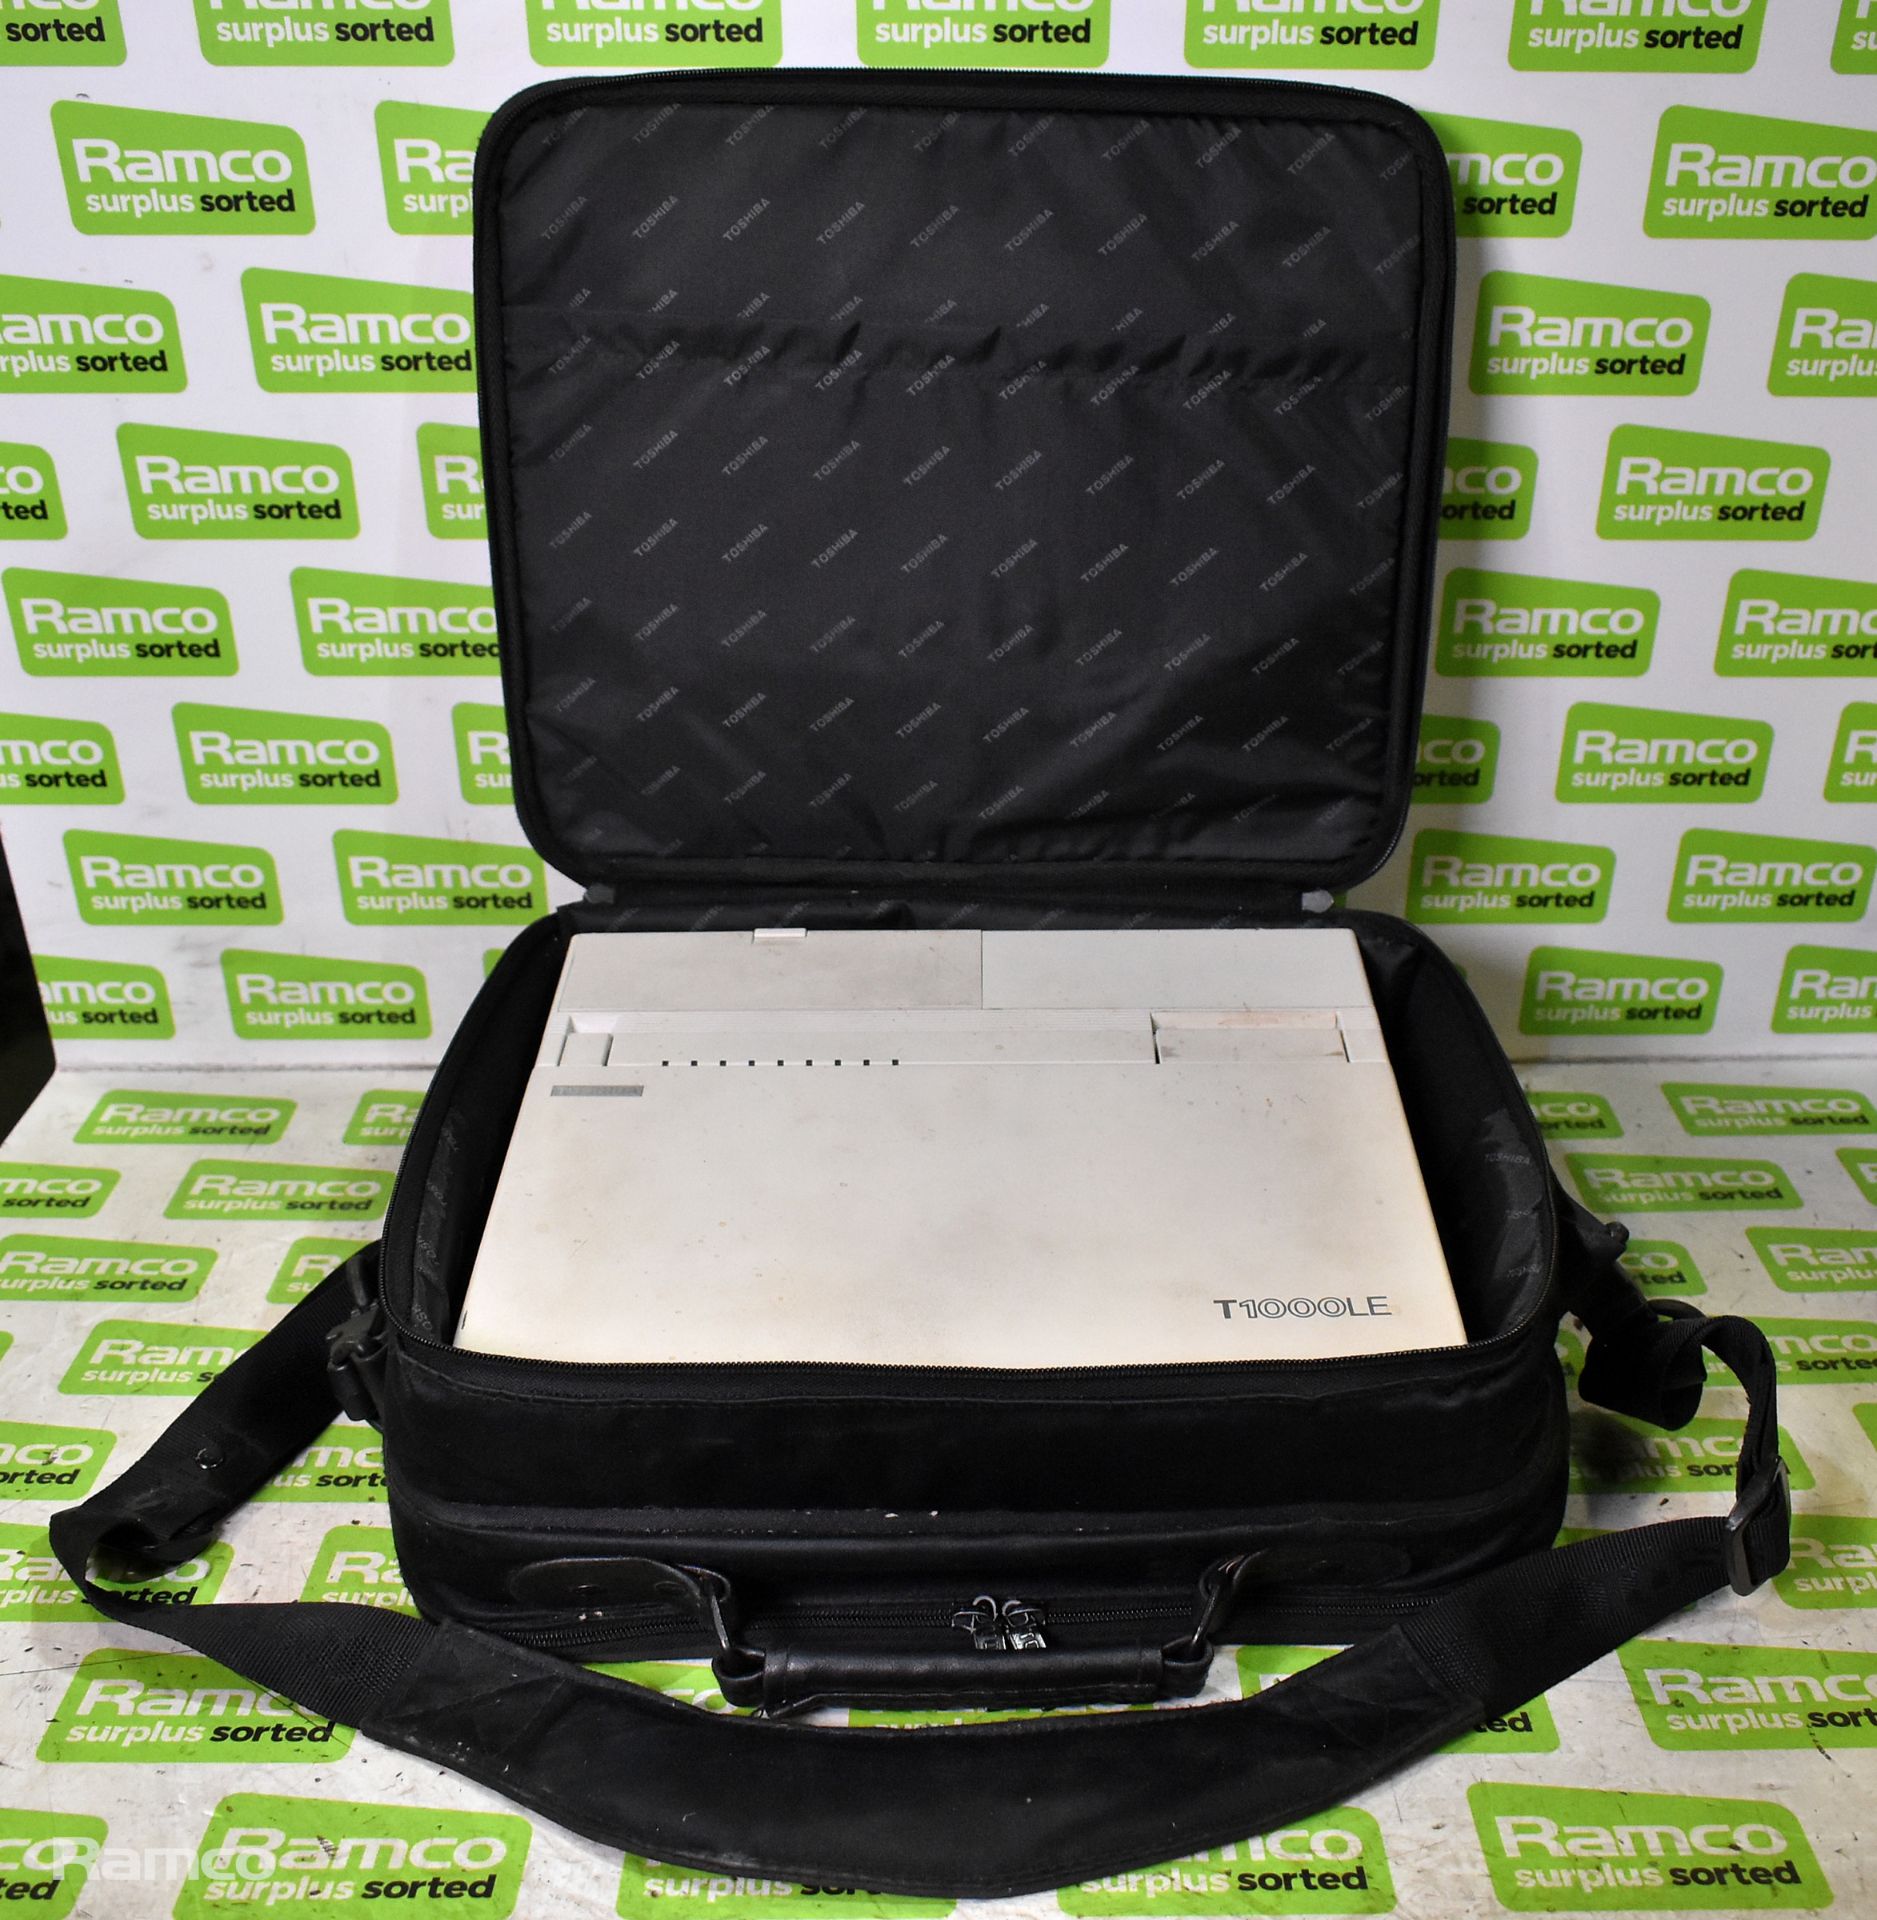 Toshiba T1000LE System Unit personal portable computer with charger and laptop bag - NO HARD DRIVE - Image 7 of 9